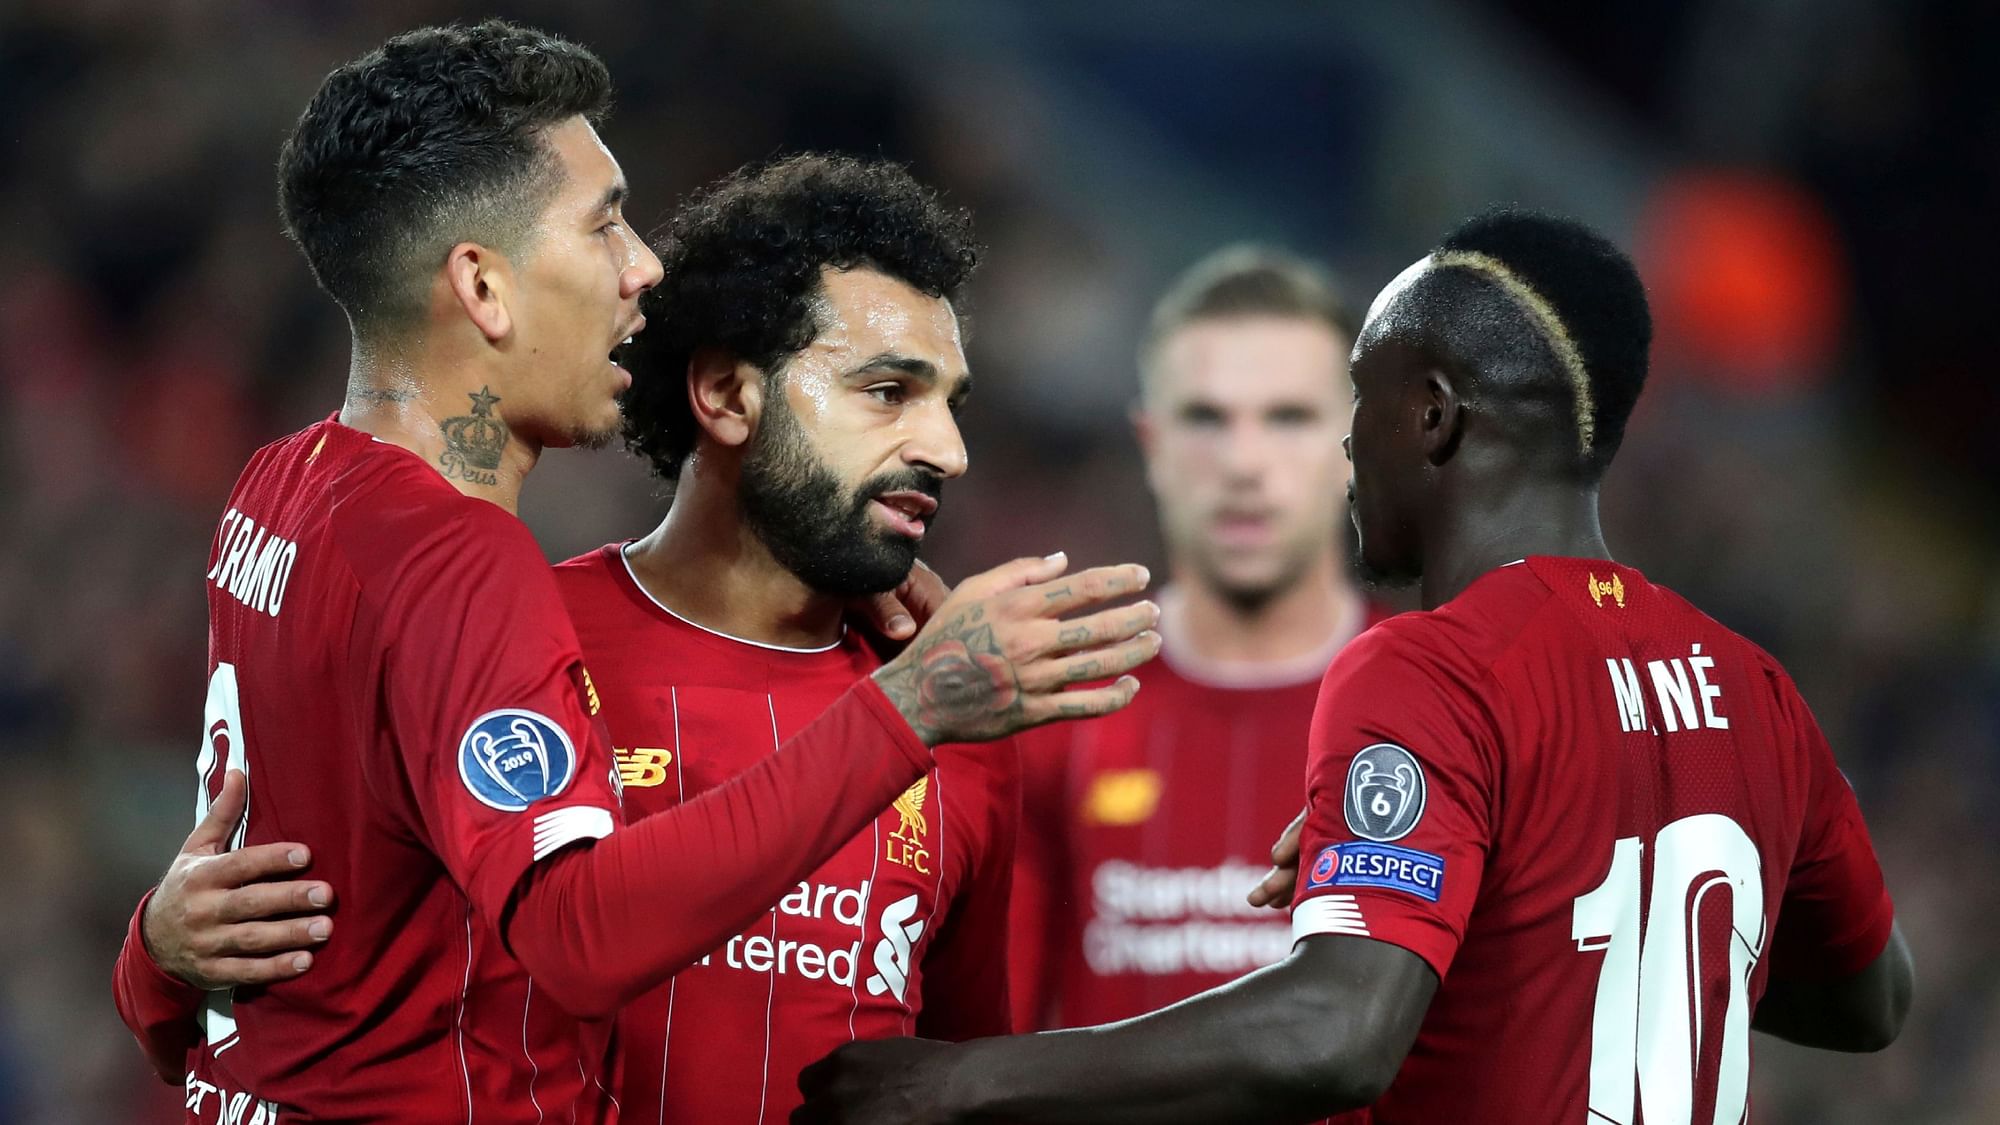 Mohamed Salah’s 69th-minute strike earned Liverpool a wild 4-3 win in the Champions League.